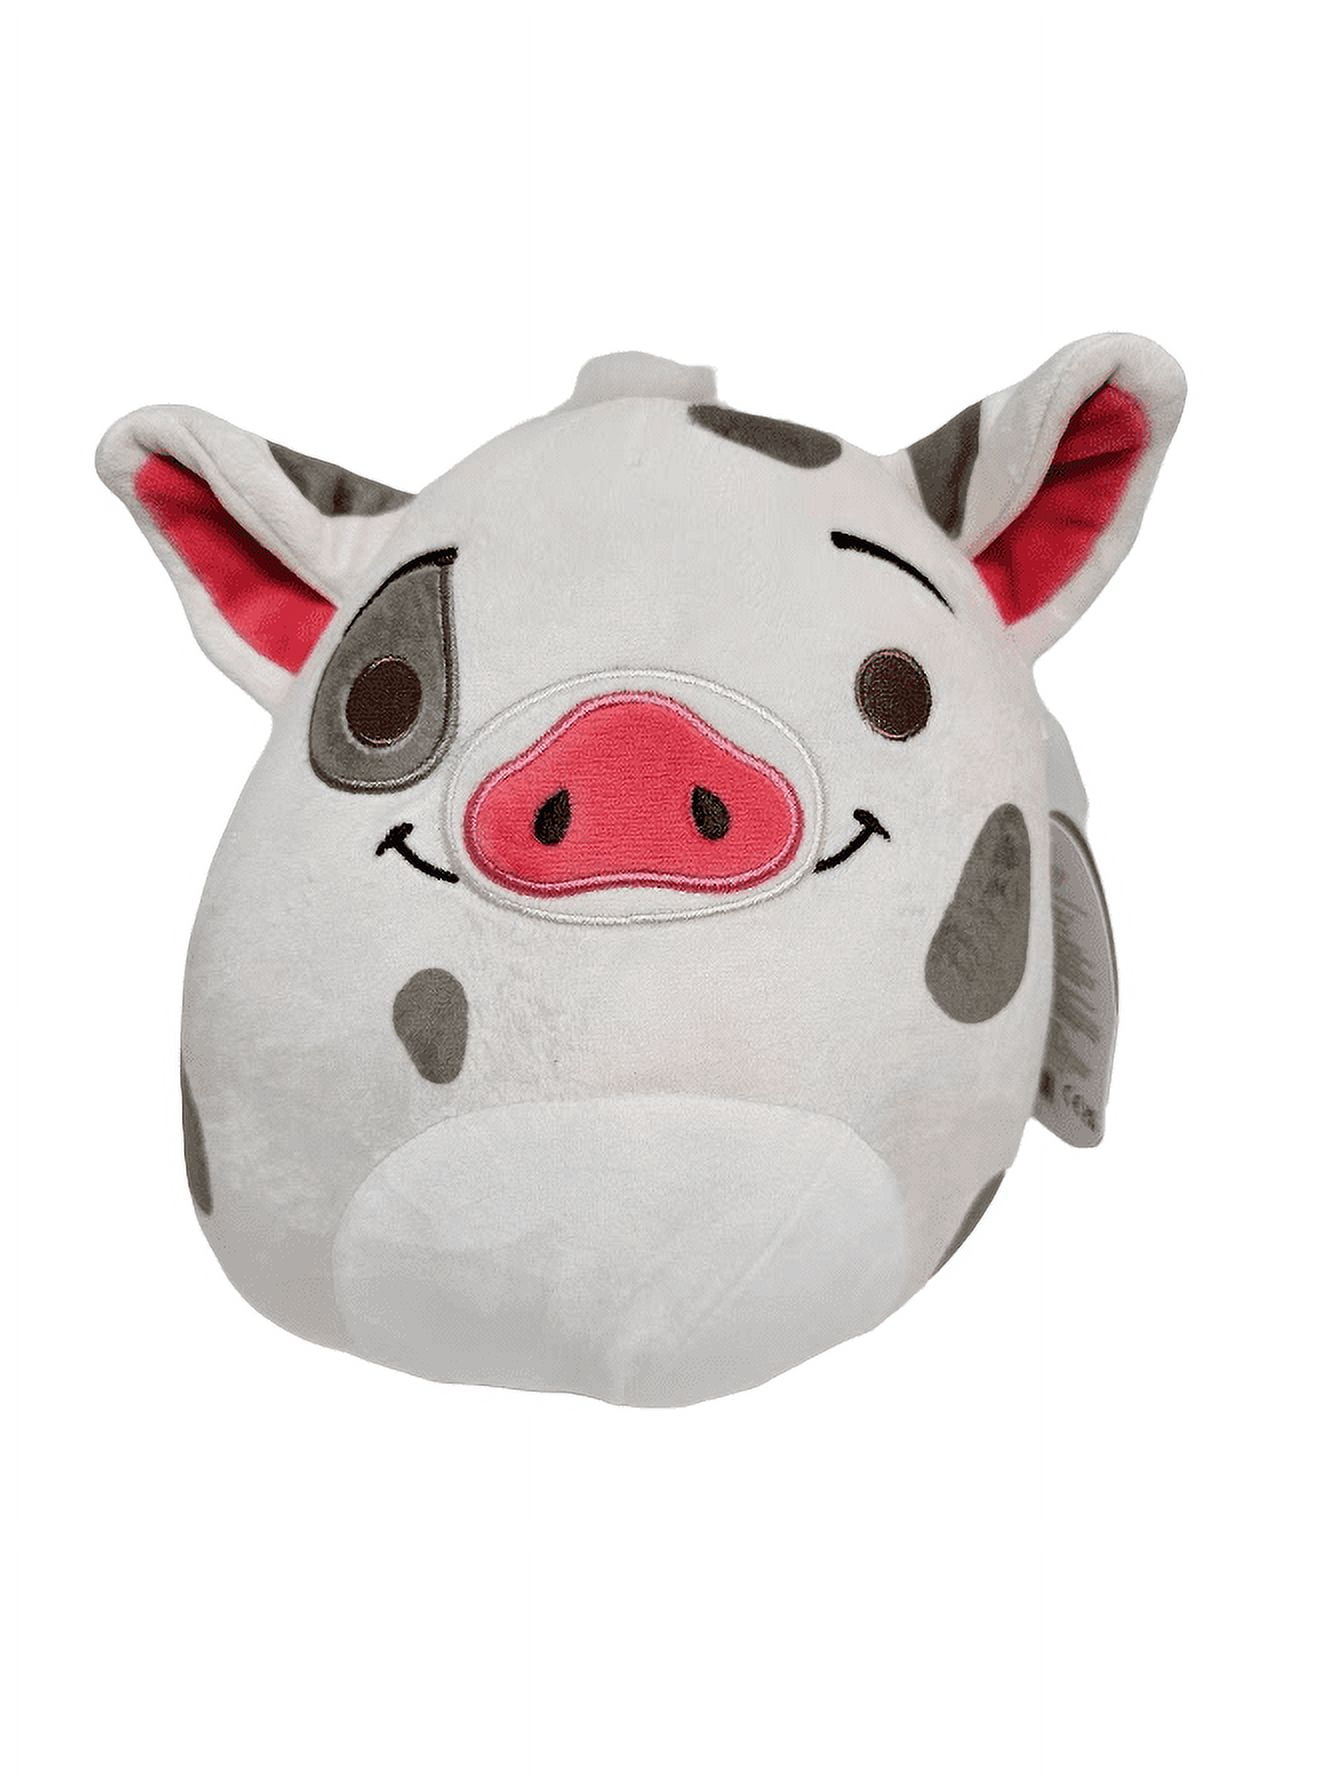  Squishmallows Official Kellytoy Disney Characters Squishy Soft  Stuffed Plush Toy Animal (7.5 Inches, Stitch) : Toys & Games